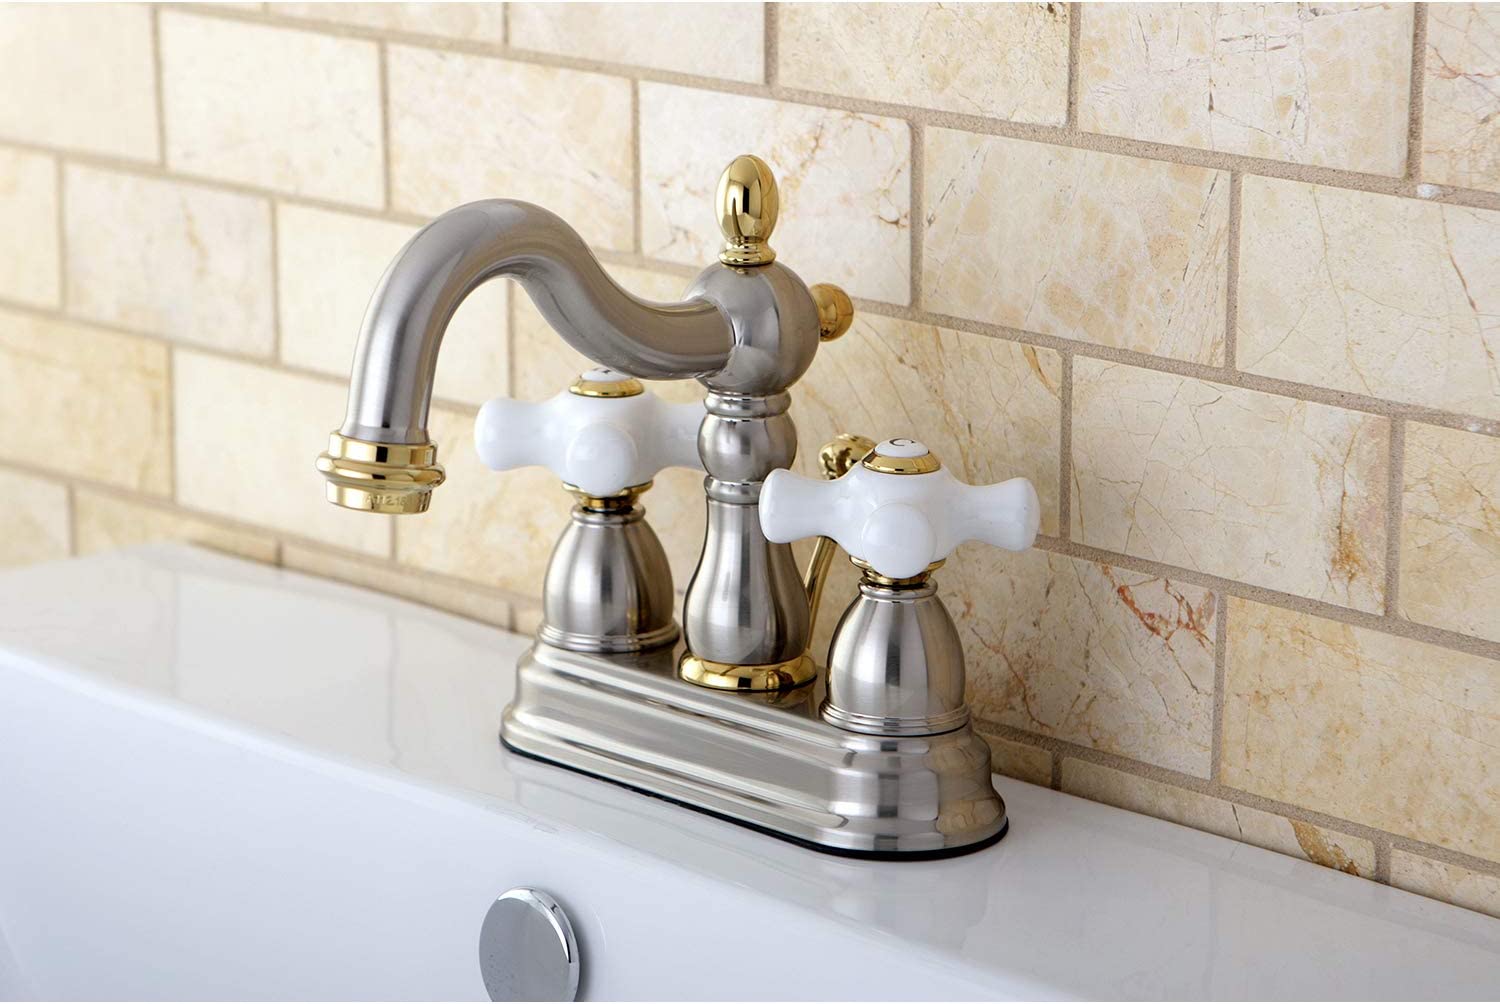 Kingston Brass KB1604PX Heritage 4-Inch Centerset Lavatory Faucet with Porcelain Cross Handle, Polished Chrome and Polished Brass